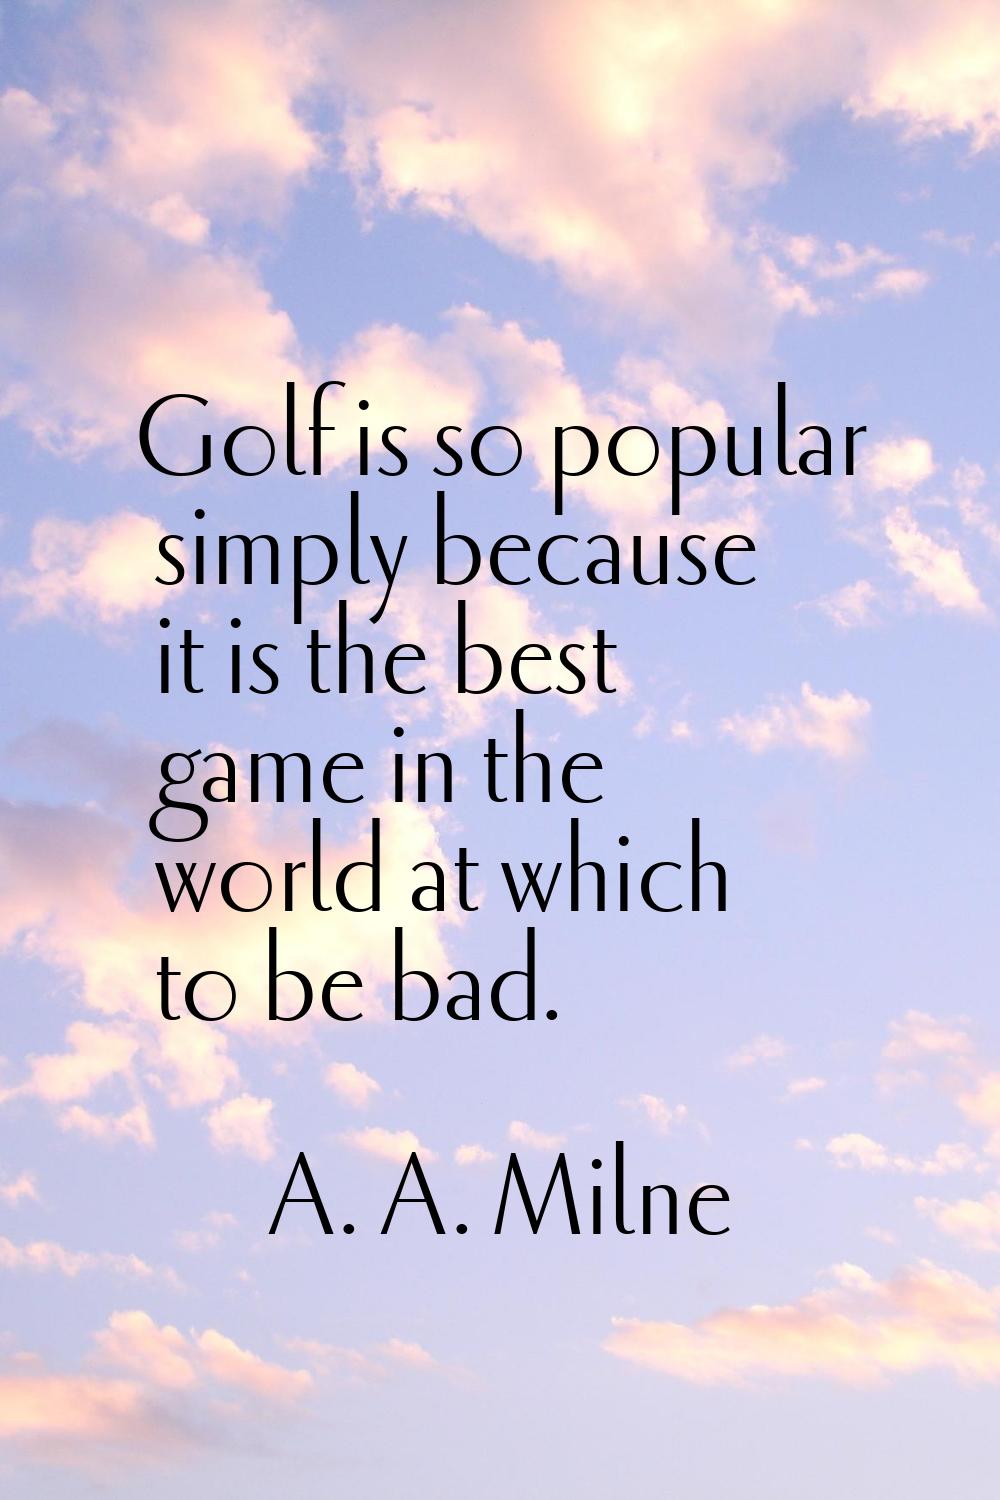 Golf is so popular simply because it is the best game in the world at which to be bad.